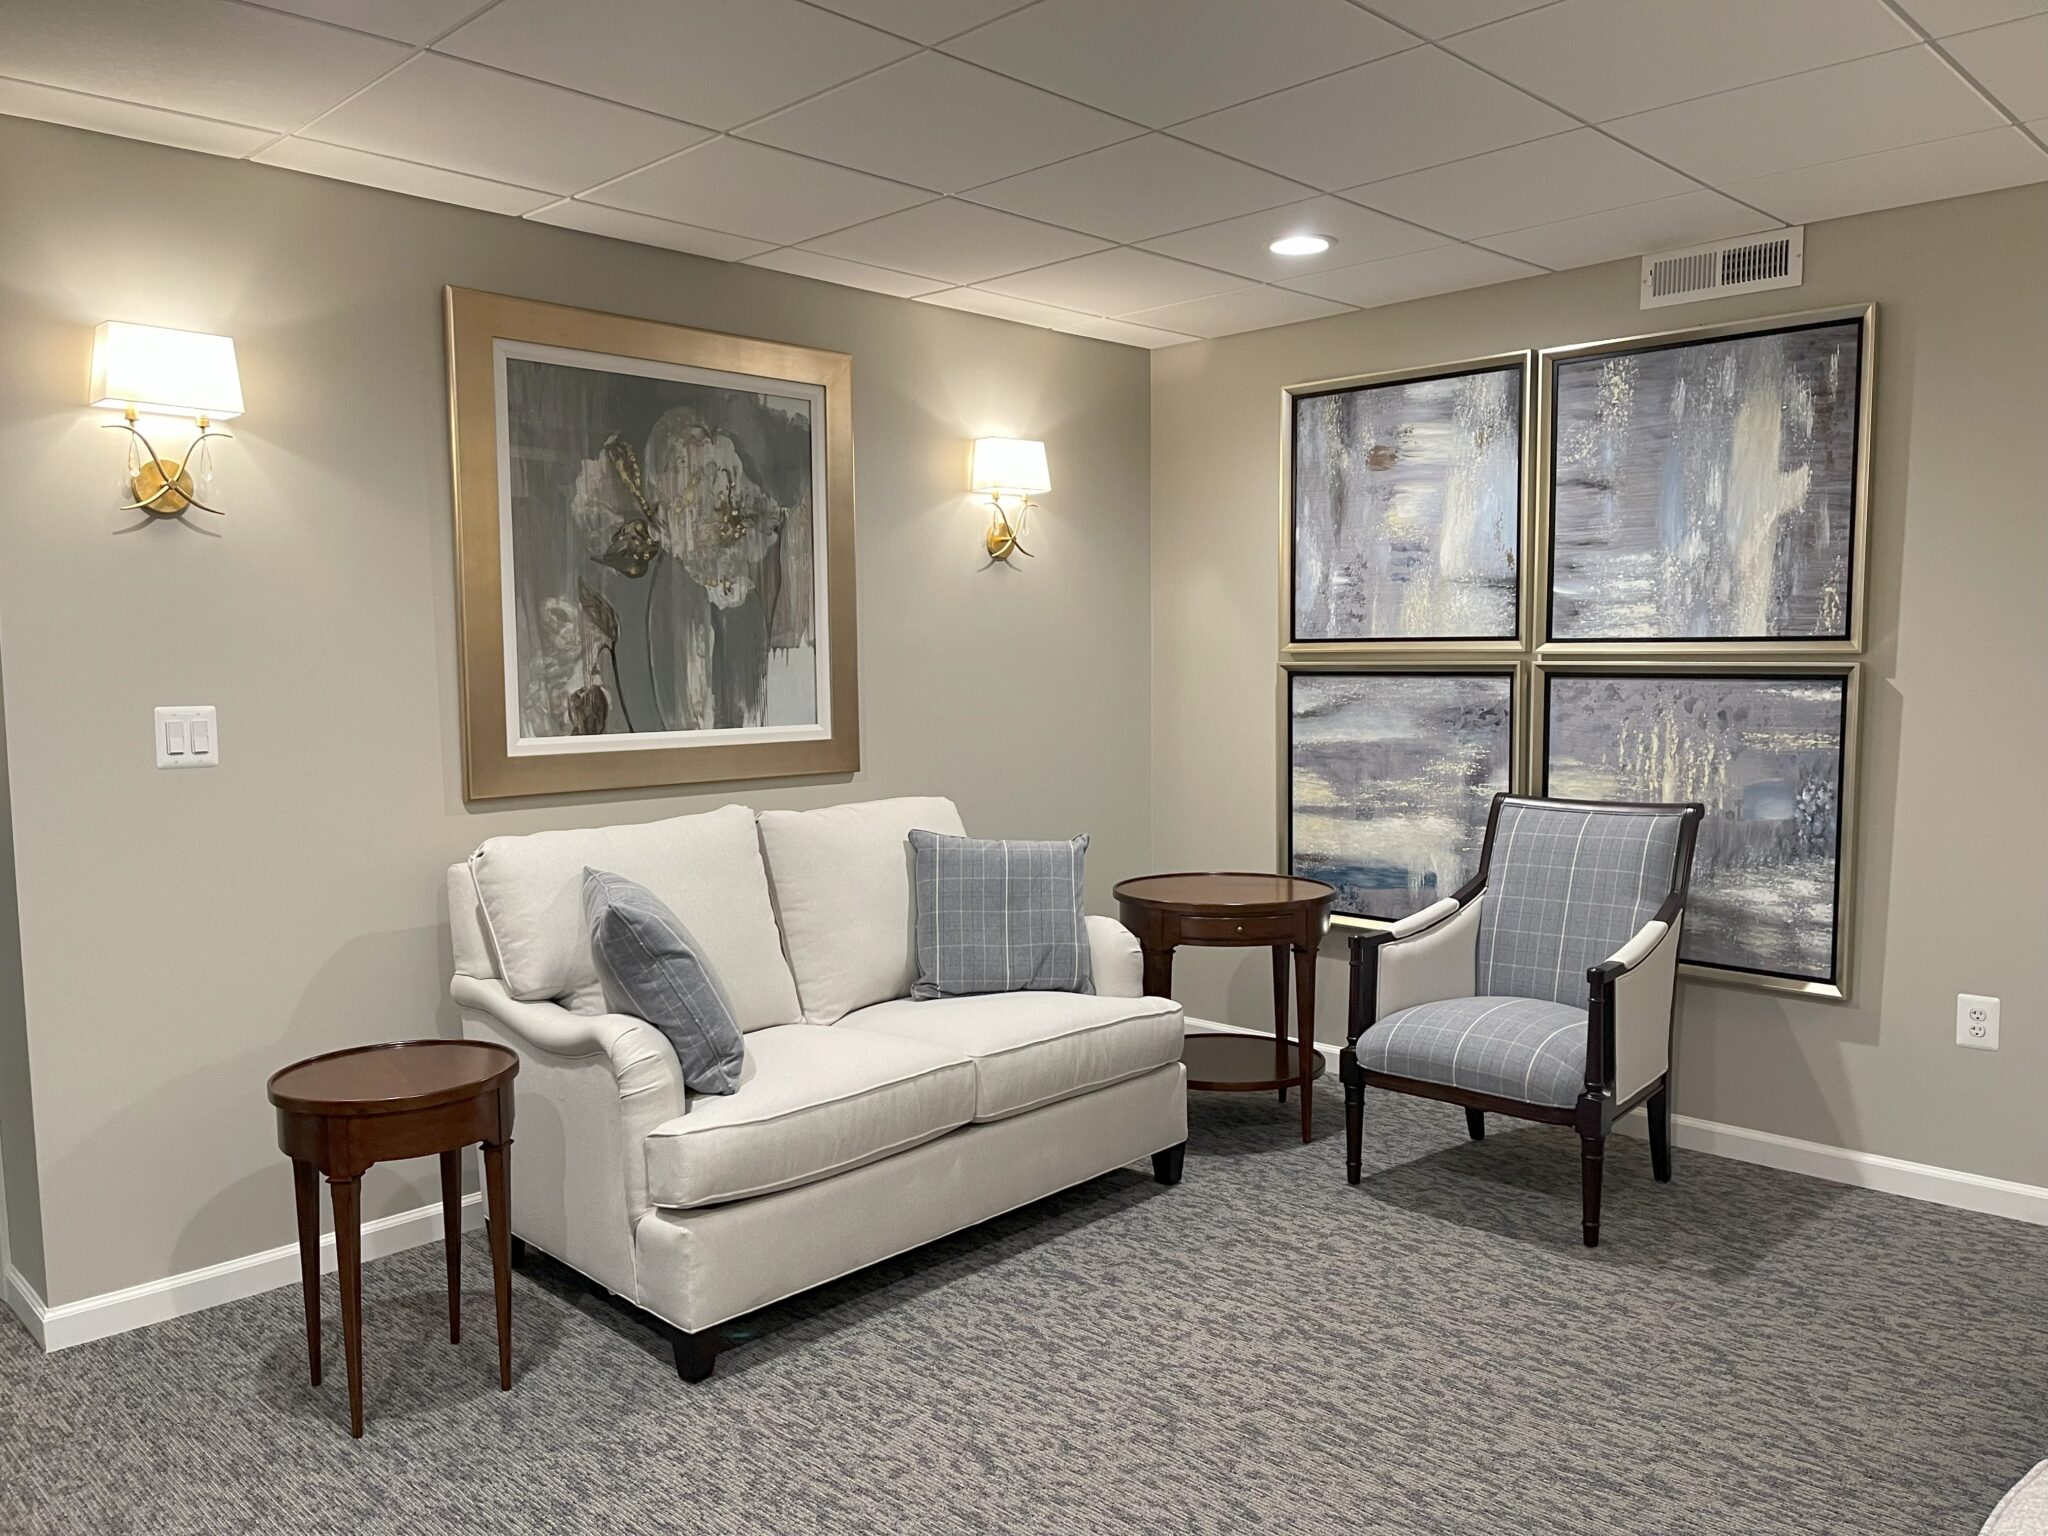 Murphy Funeral Home: Sitting Room Renovation